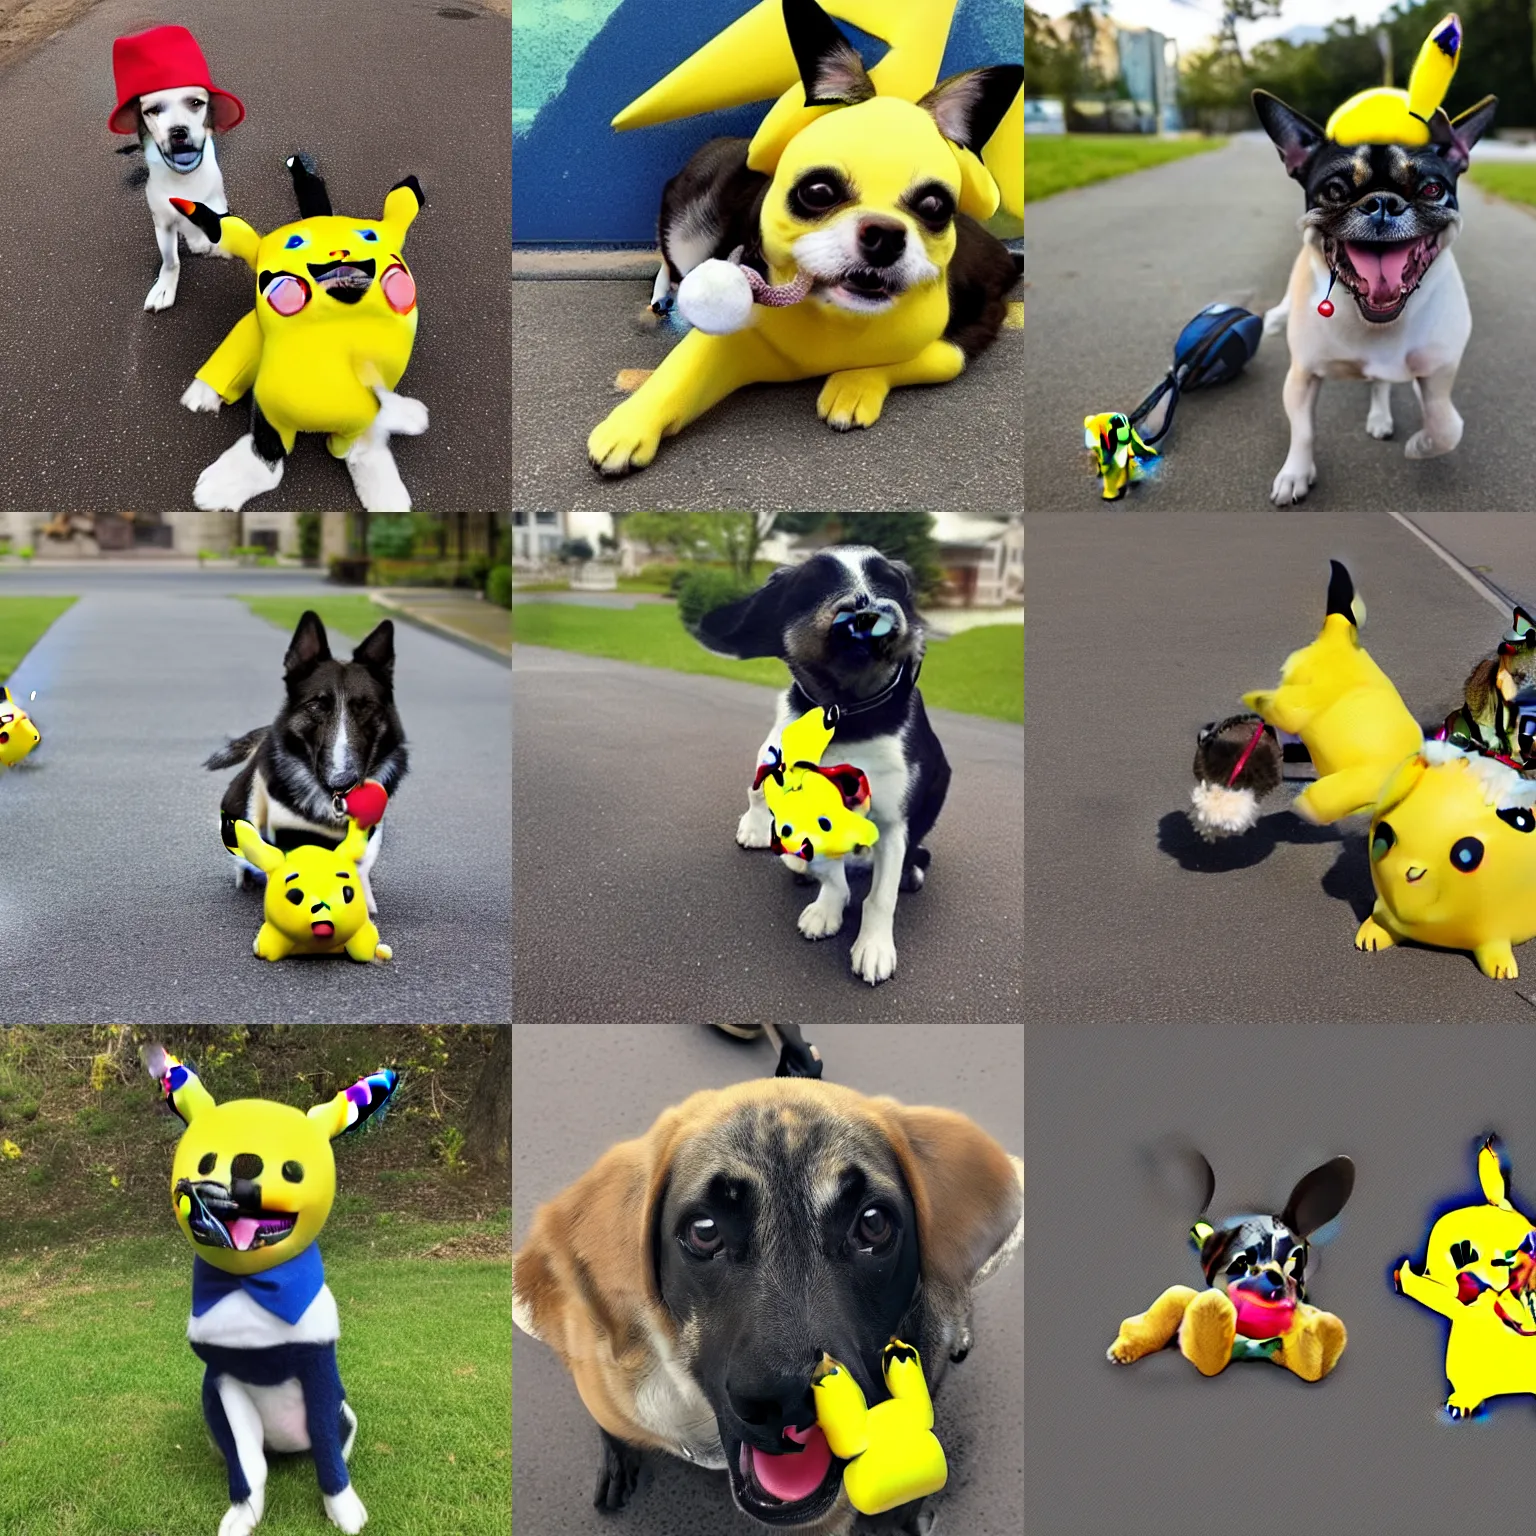 Prompt: photo of a dog with a caught pikachu in mouth